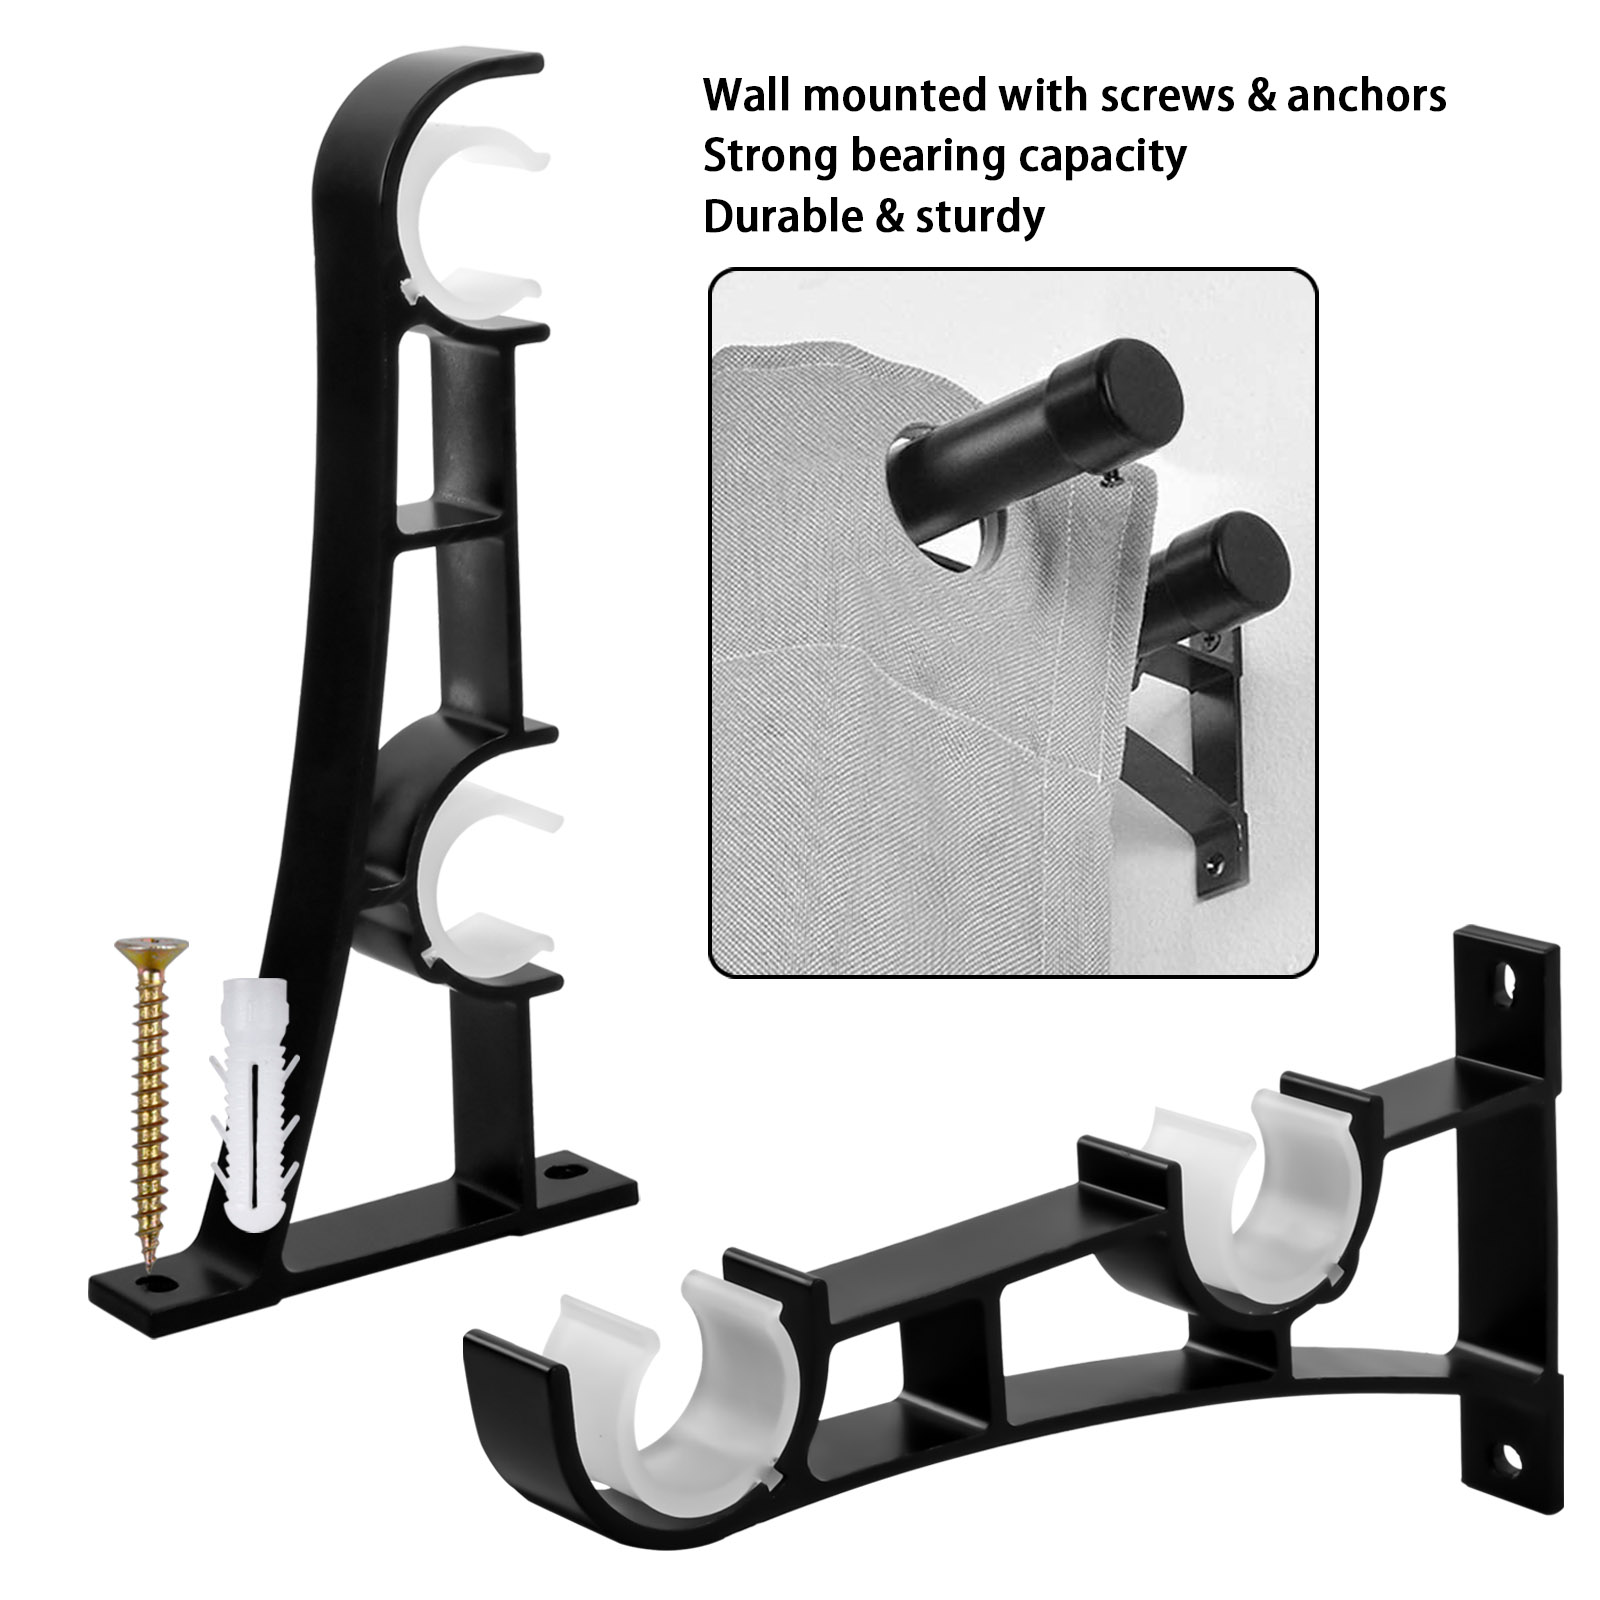 2 sets Heavy Duty Curtain Rod Brackets - Double Curtain Rod Holder Hooks  for Clothes Rods - Black Metal Curtain Pole Brackets with 4 Screws -  Supports